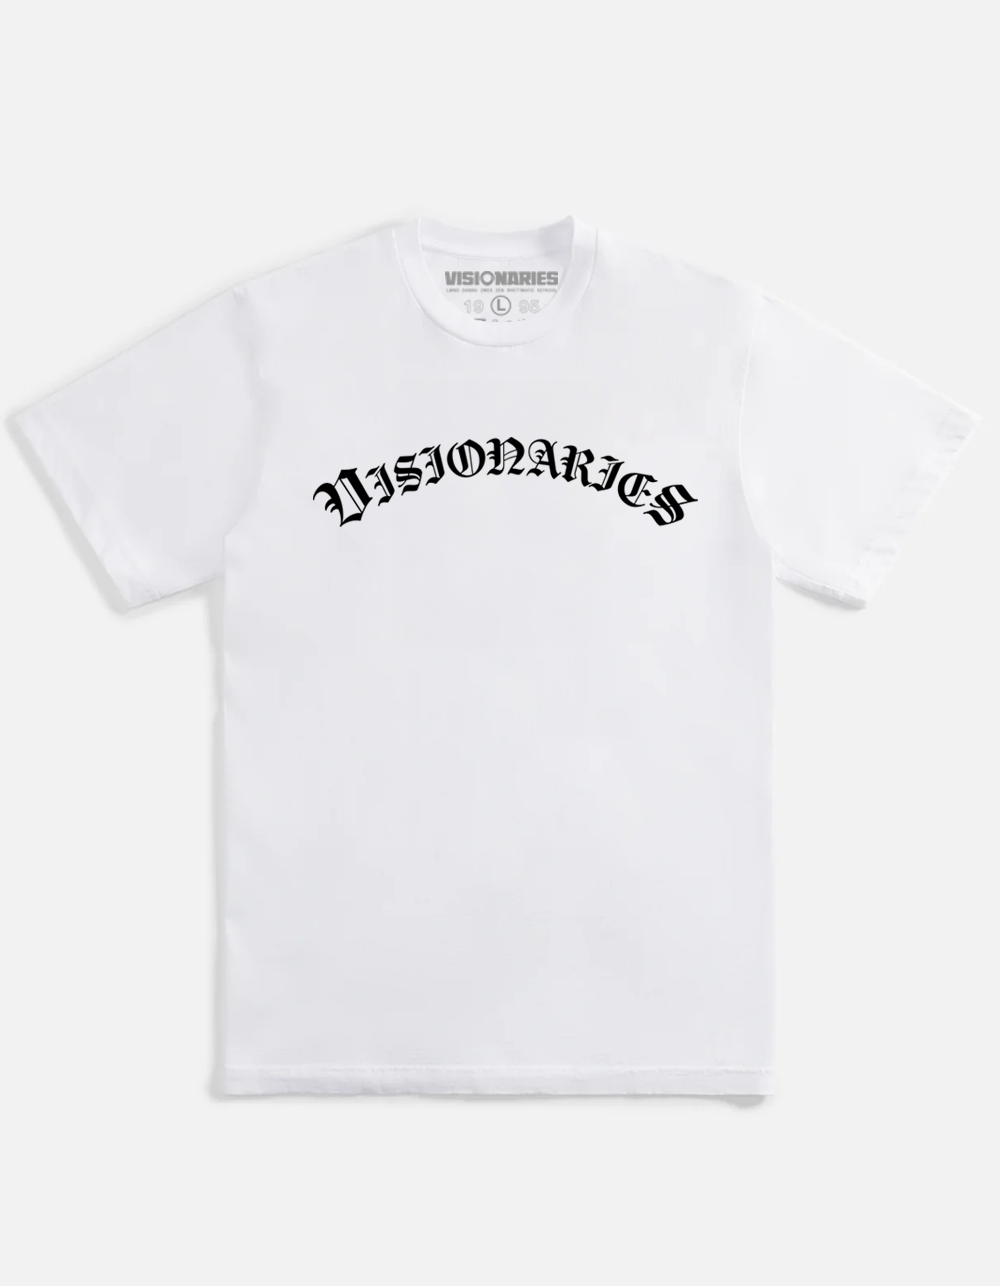 Old English White Tee (Adult)